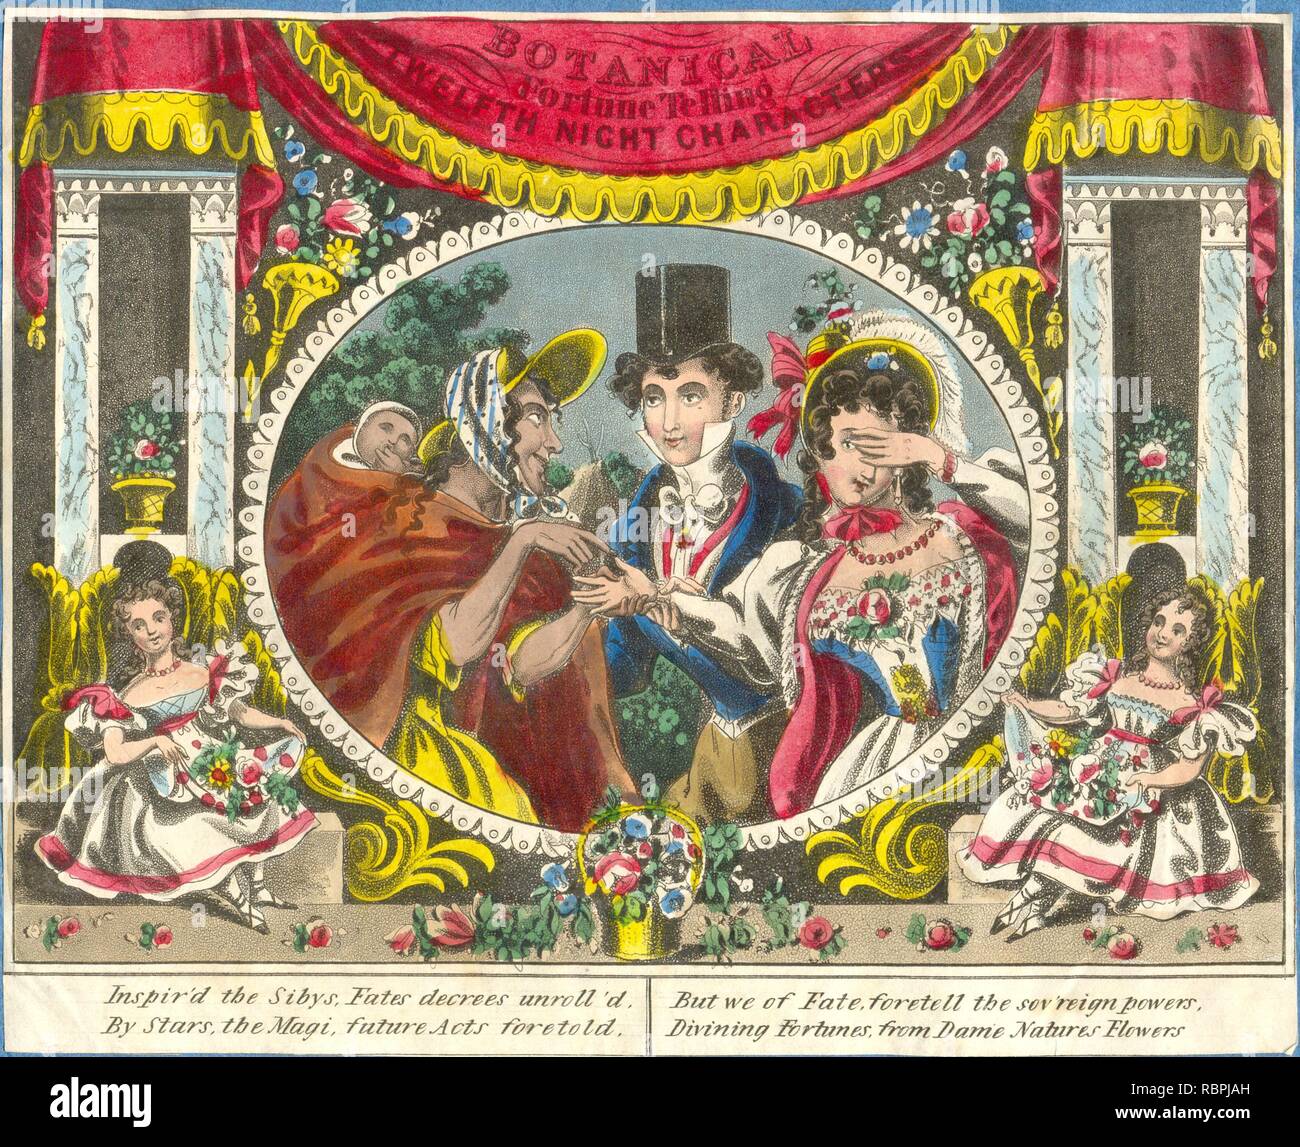 Wrapper for Marks's New Botanical Fortune Telling Twelfth Night Characters   1840 Stock Photo